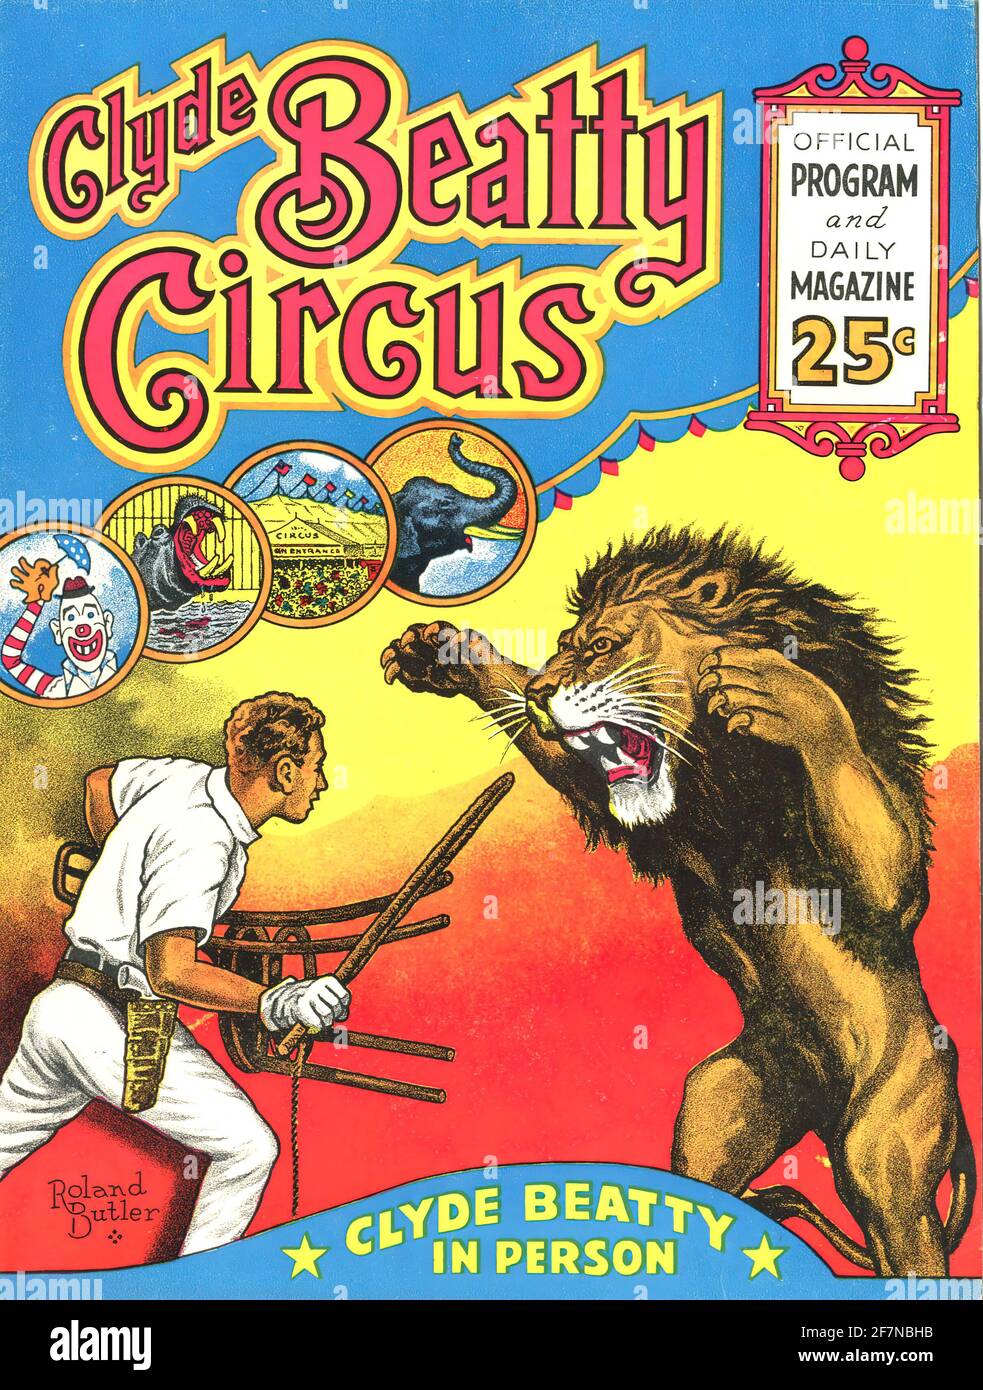 A vintage circus poster for the Clyde Beaty Circus Stock Photo